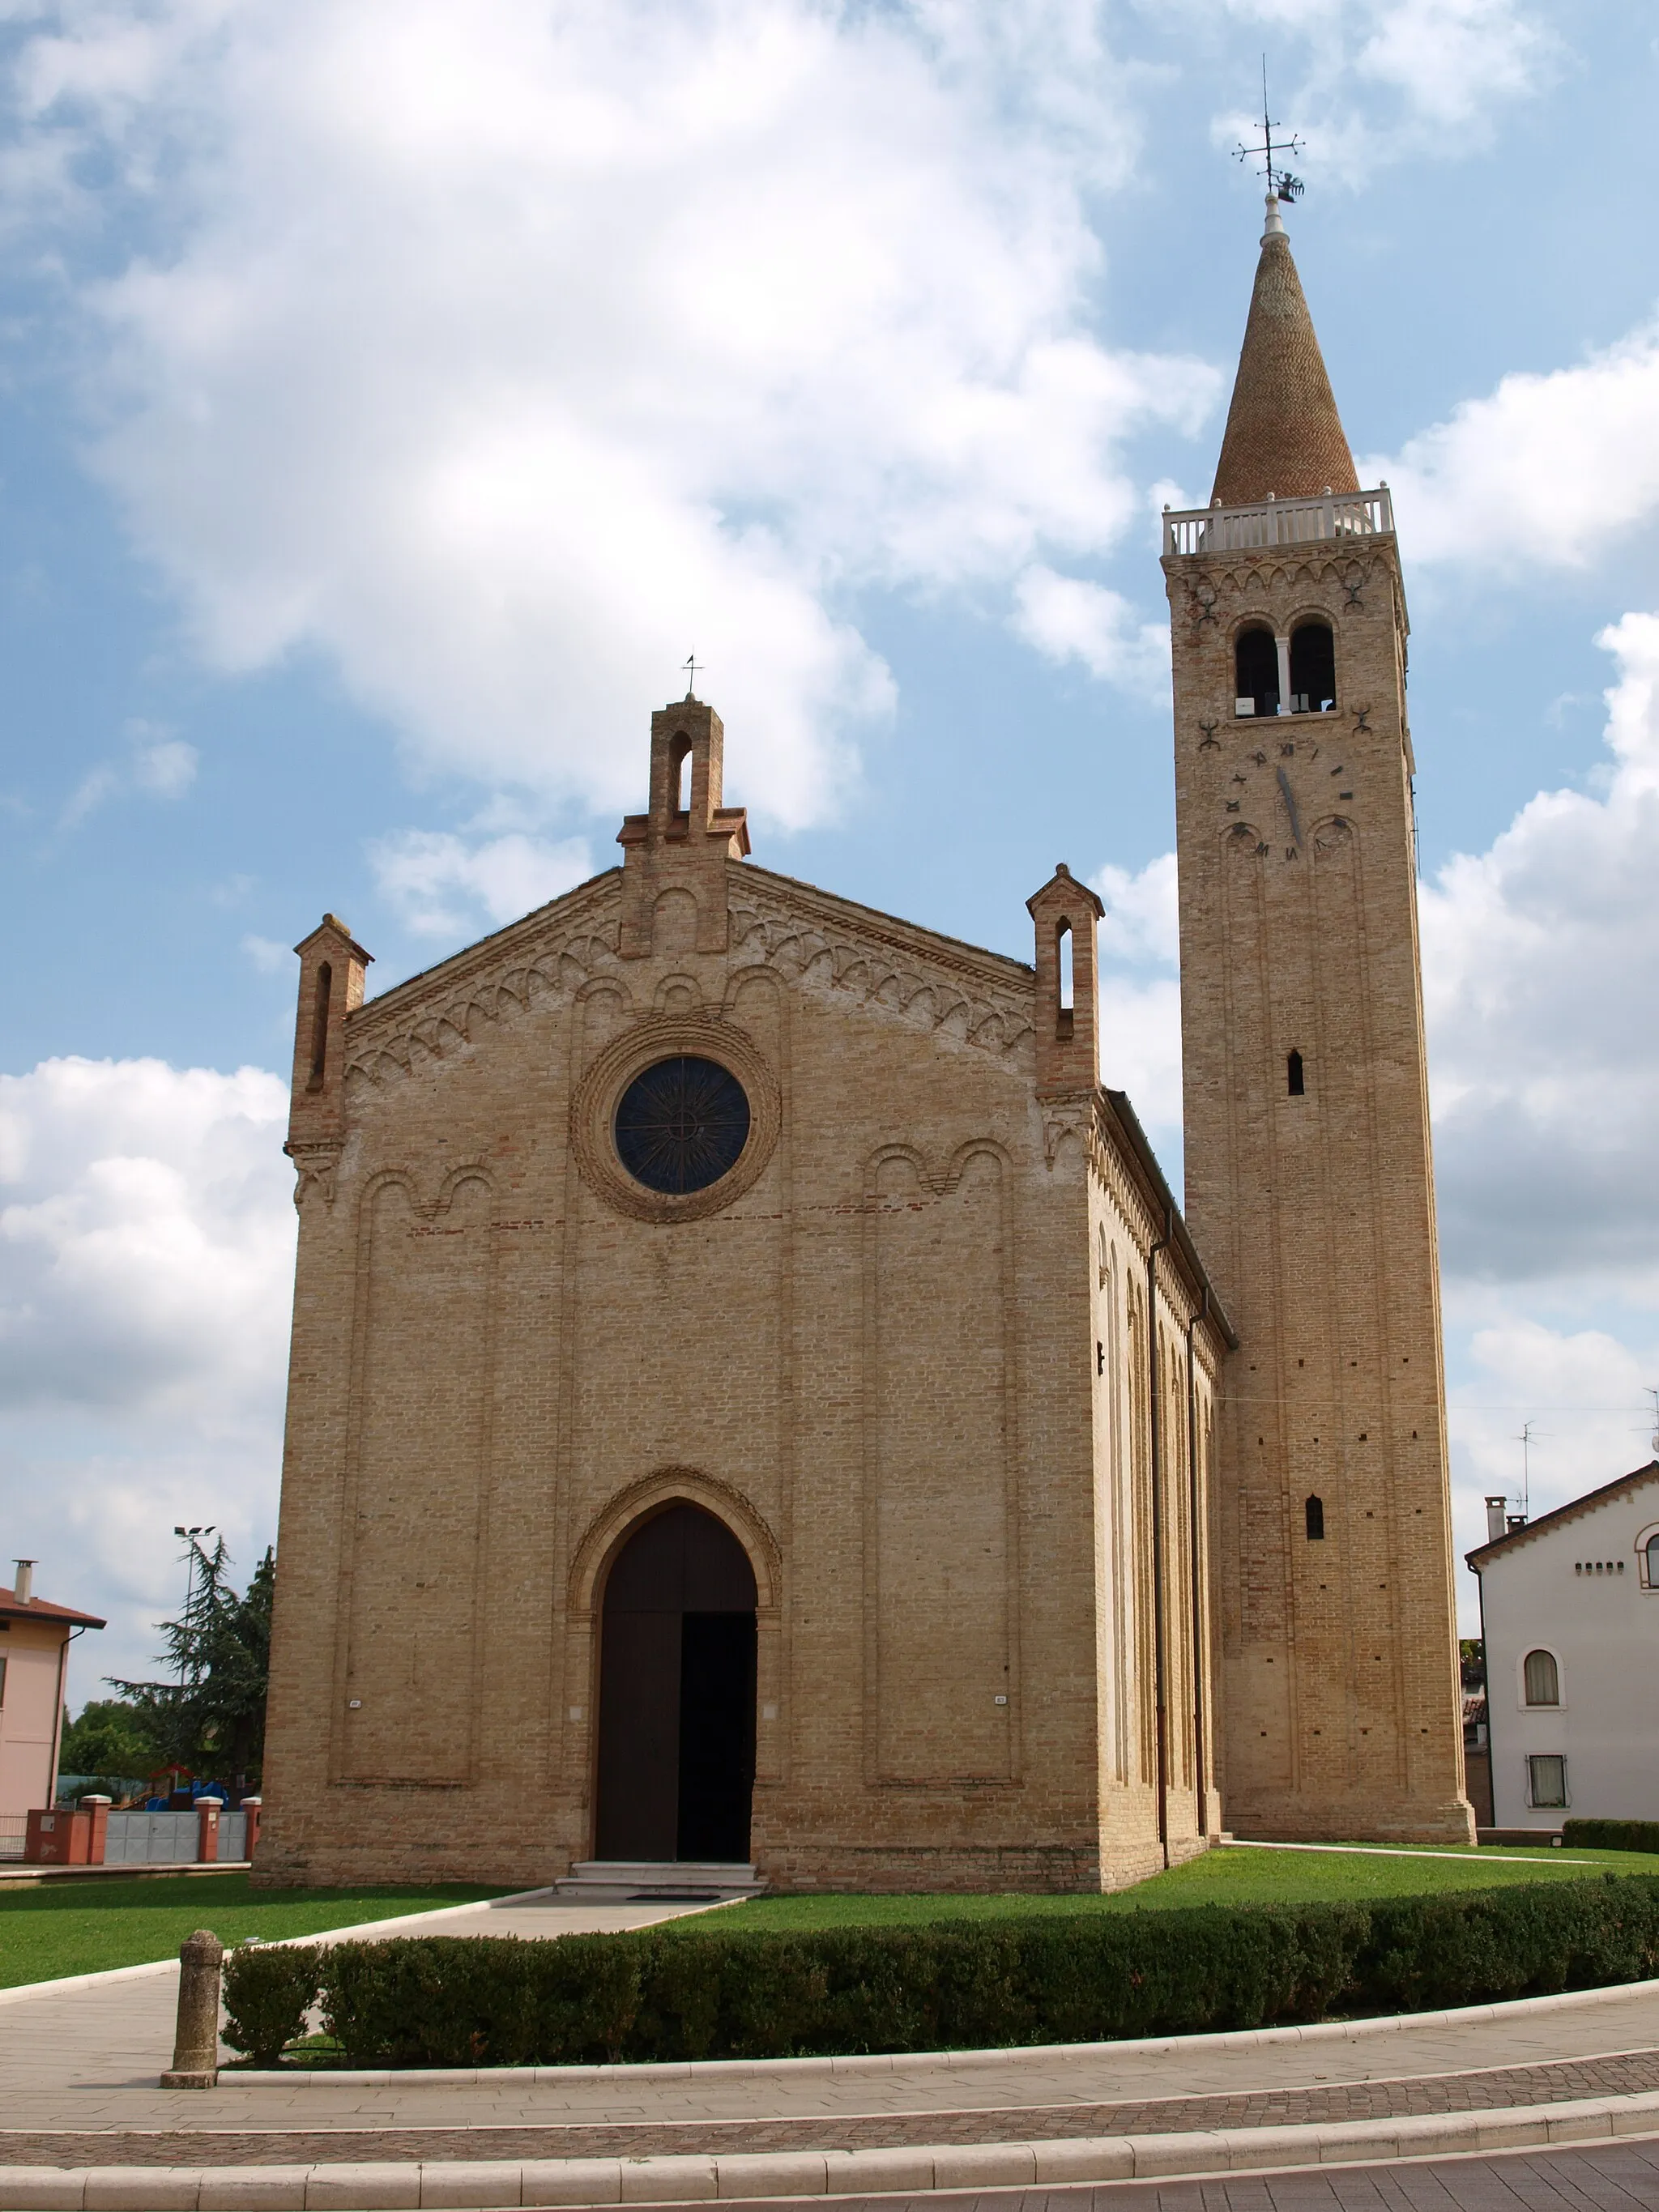 Photo showing: A frontal view of the chiesa di Sant'Antonio Abate (church of Saint Anthony the Great) in Pravisdomini, in Northeast Italy.